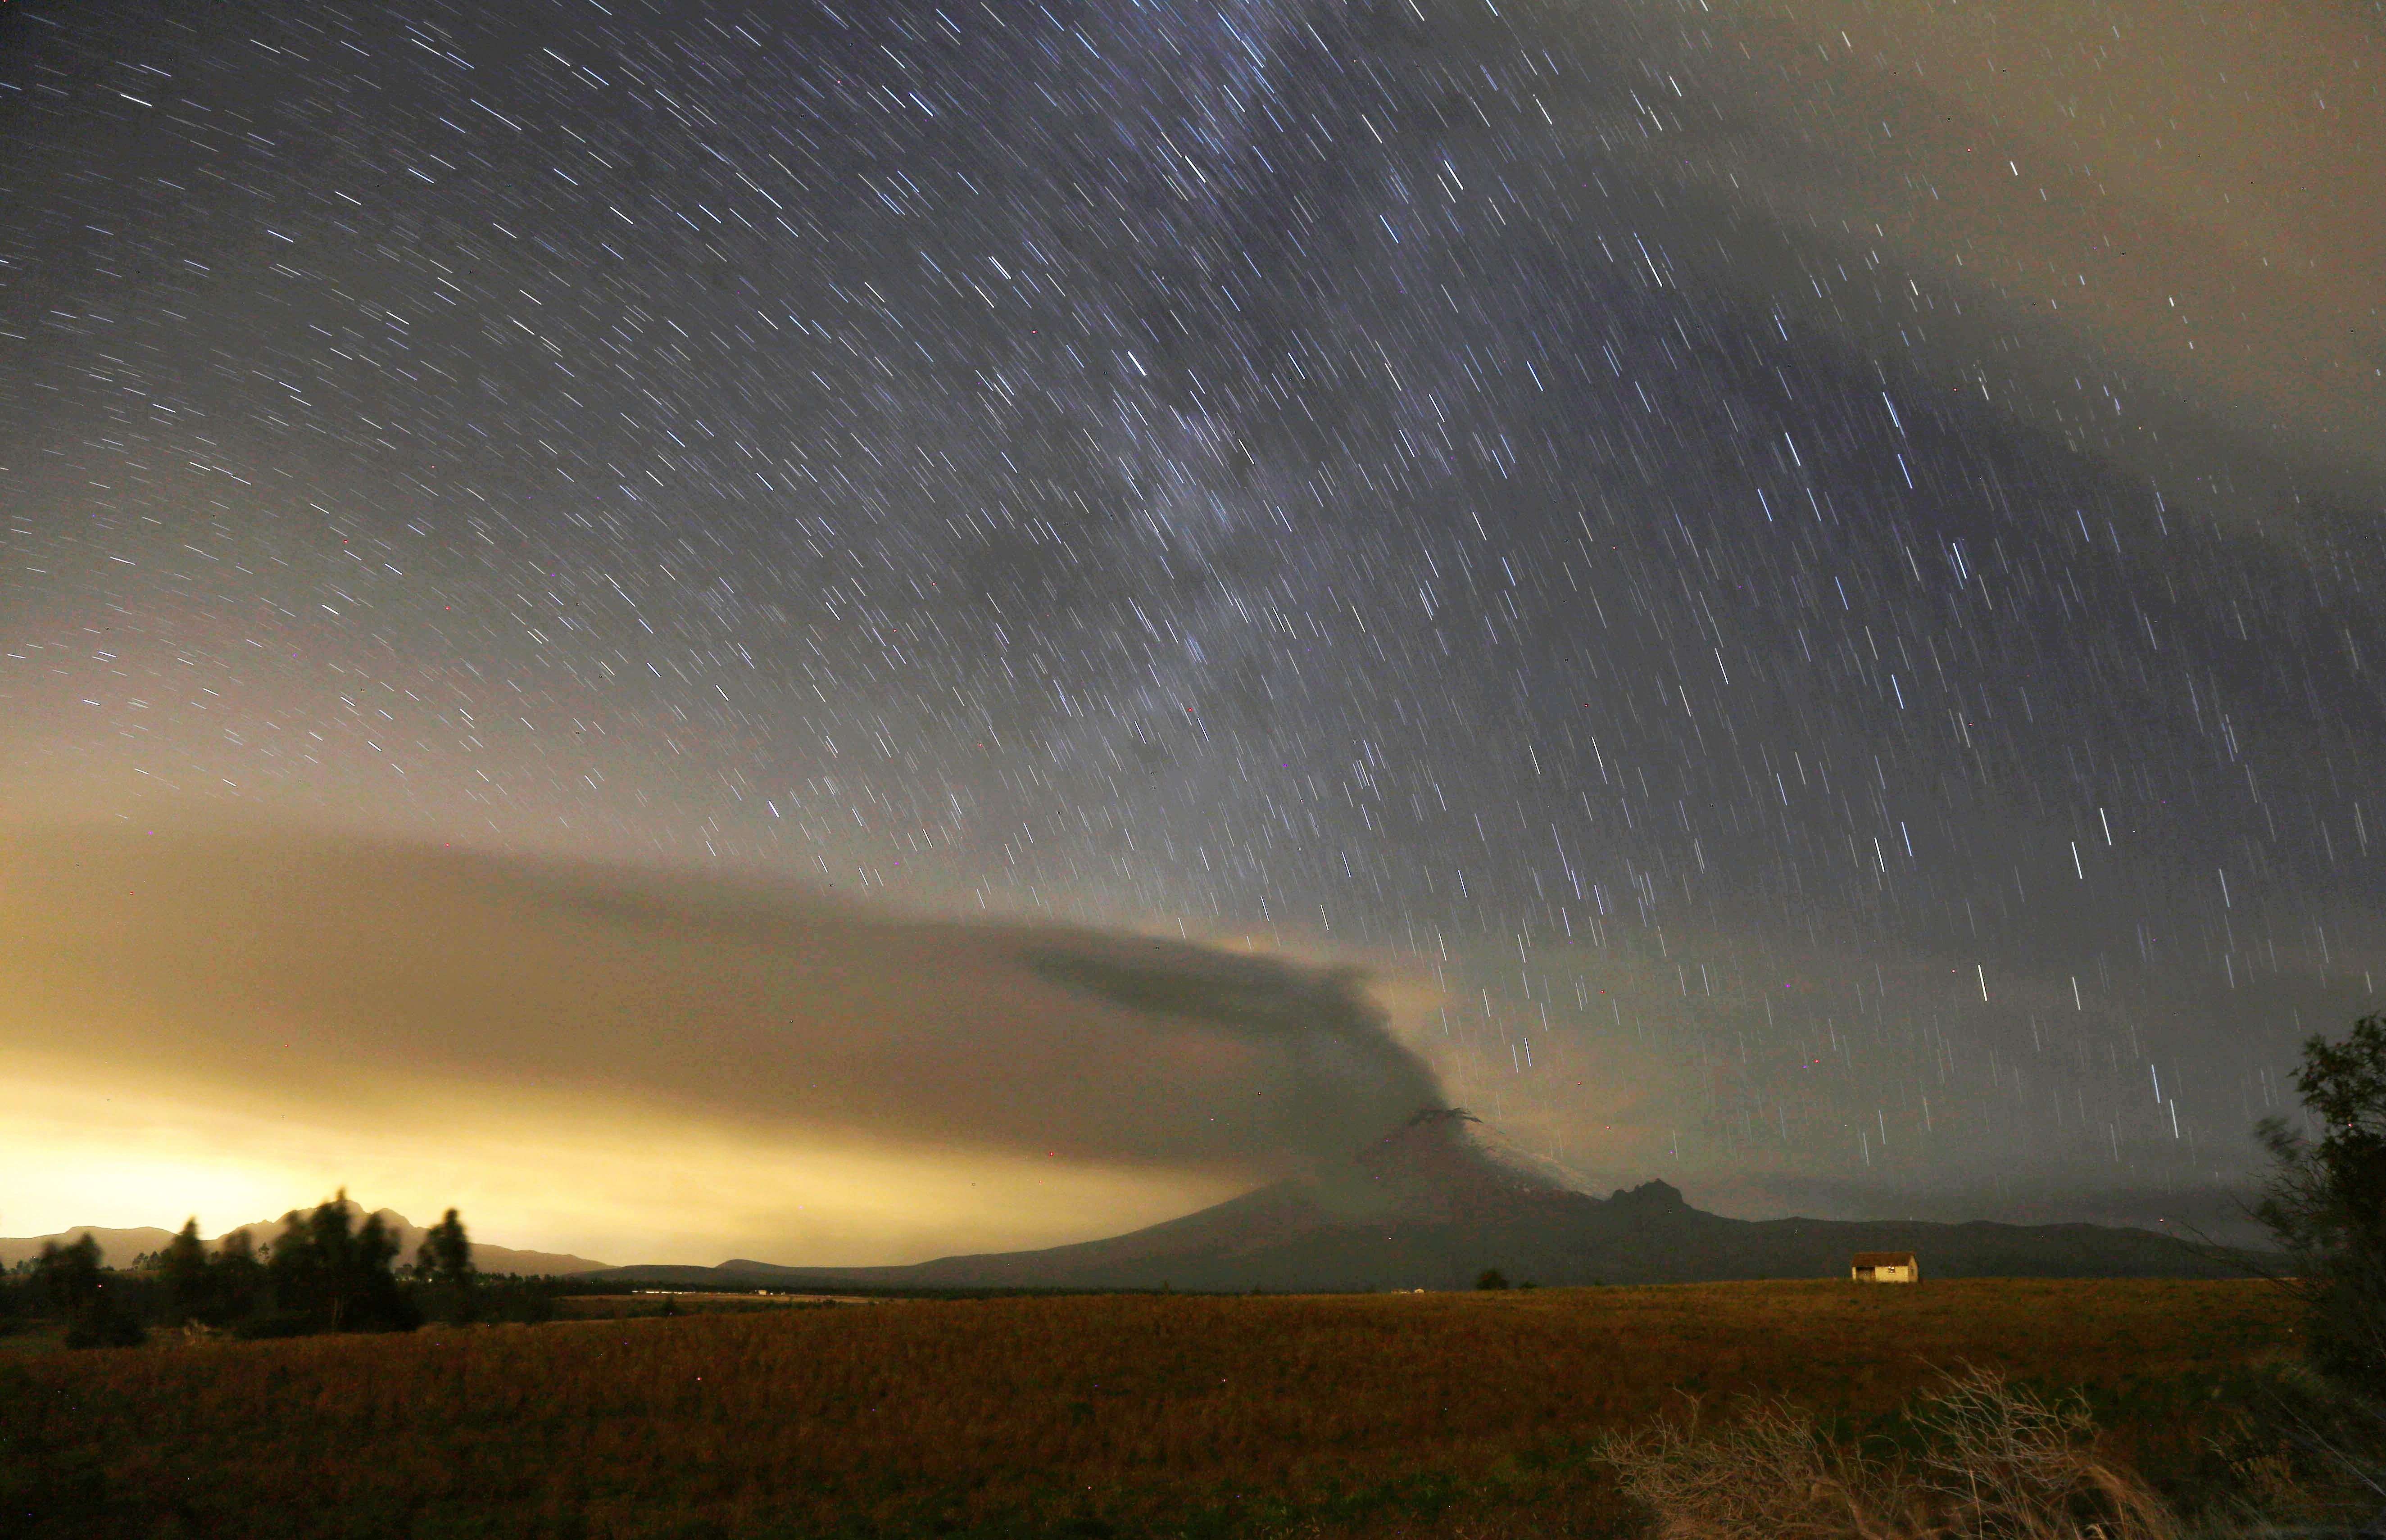 In this time exposure photo, the Cotopaxi volcano spews ash and vapor, as seen from Alaquez, Ecuador, Thursday, Sept. 3, 2015. Cotopaxi began showing renewed activity in April and its last major eruption was in 1877. (AP Photo/Dolores Ochoa)